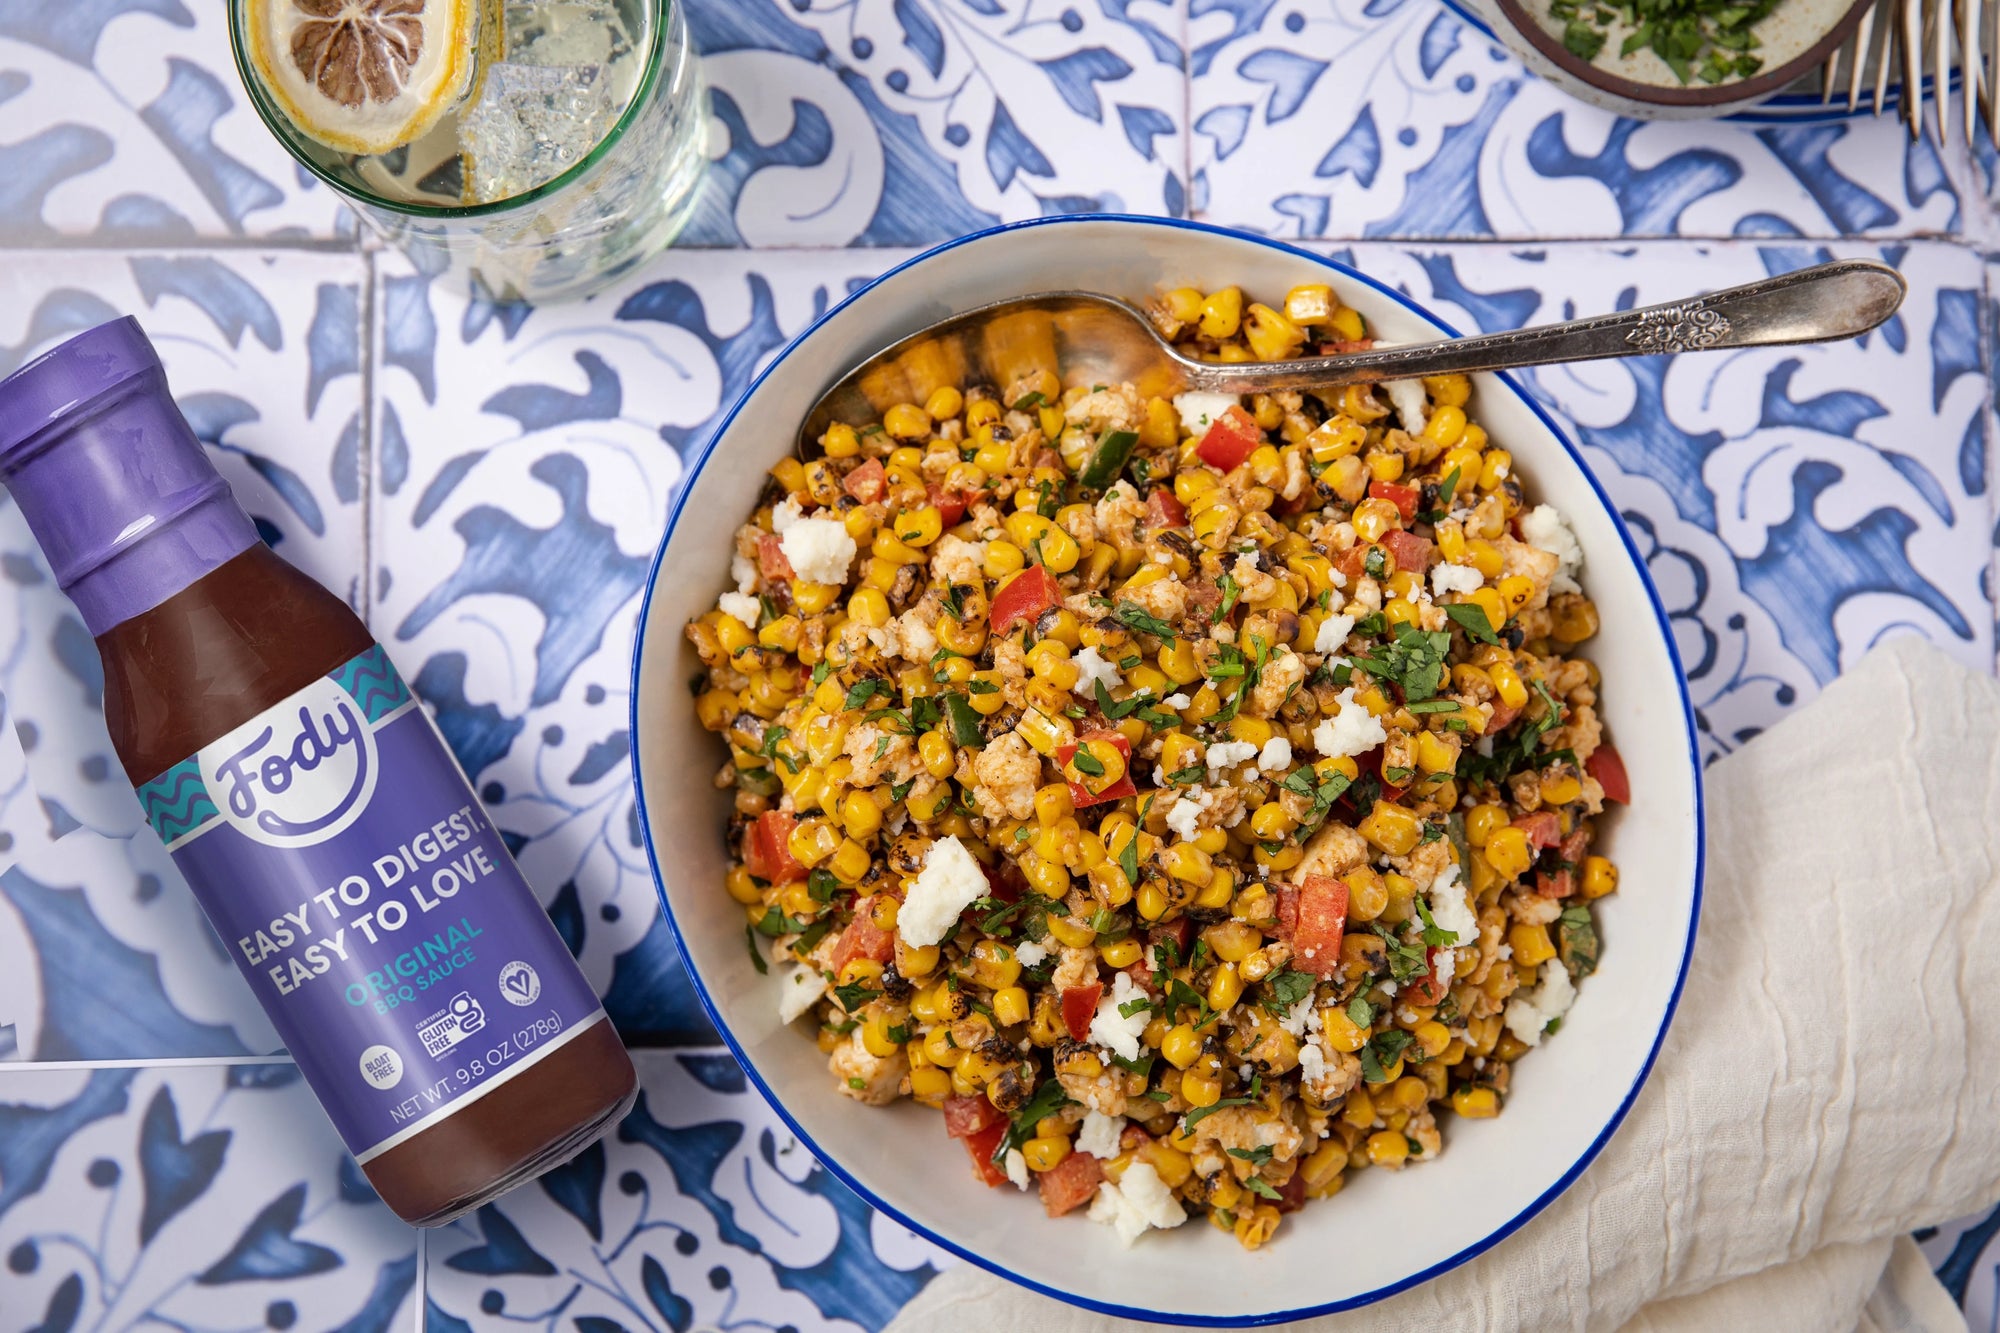 No bloat salad summer is just around the corner! Image: Fody’s BBQ corn salad in a white bowl against a backdrop of blue tiles beside a bottle of Fody’s Original BBQ Sauce.